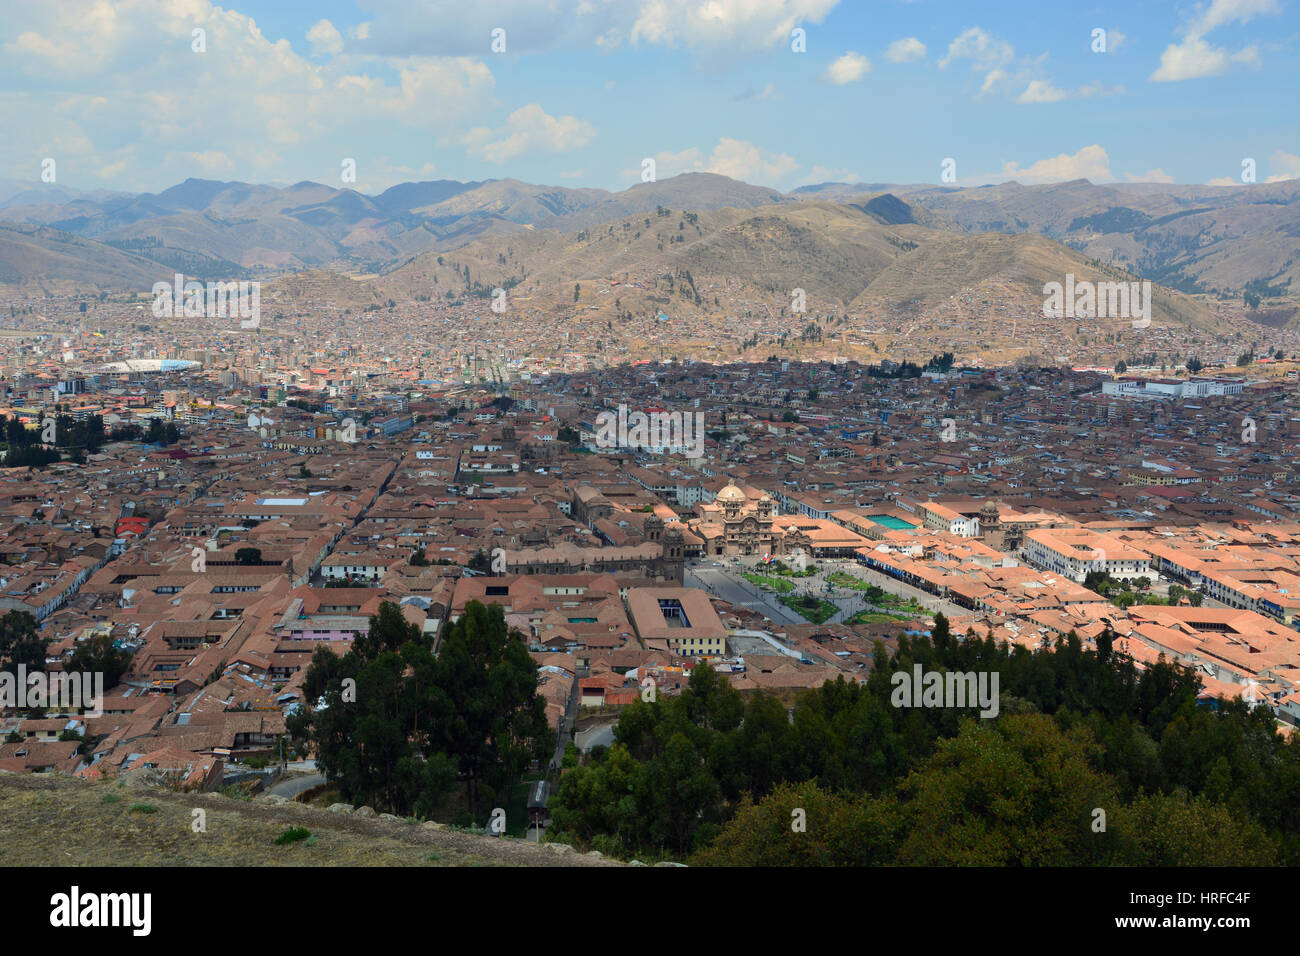 The city of Cusco spreads out across the valley and was the historic capital of the Inca Empire and is the starting point in visiting Machu Picchu. Stock Photo